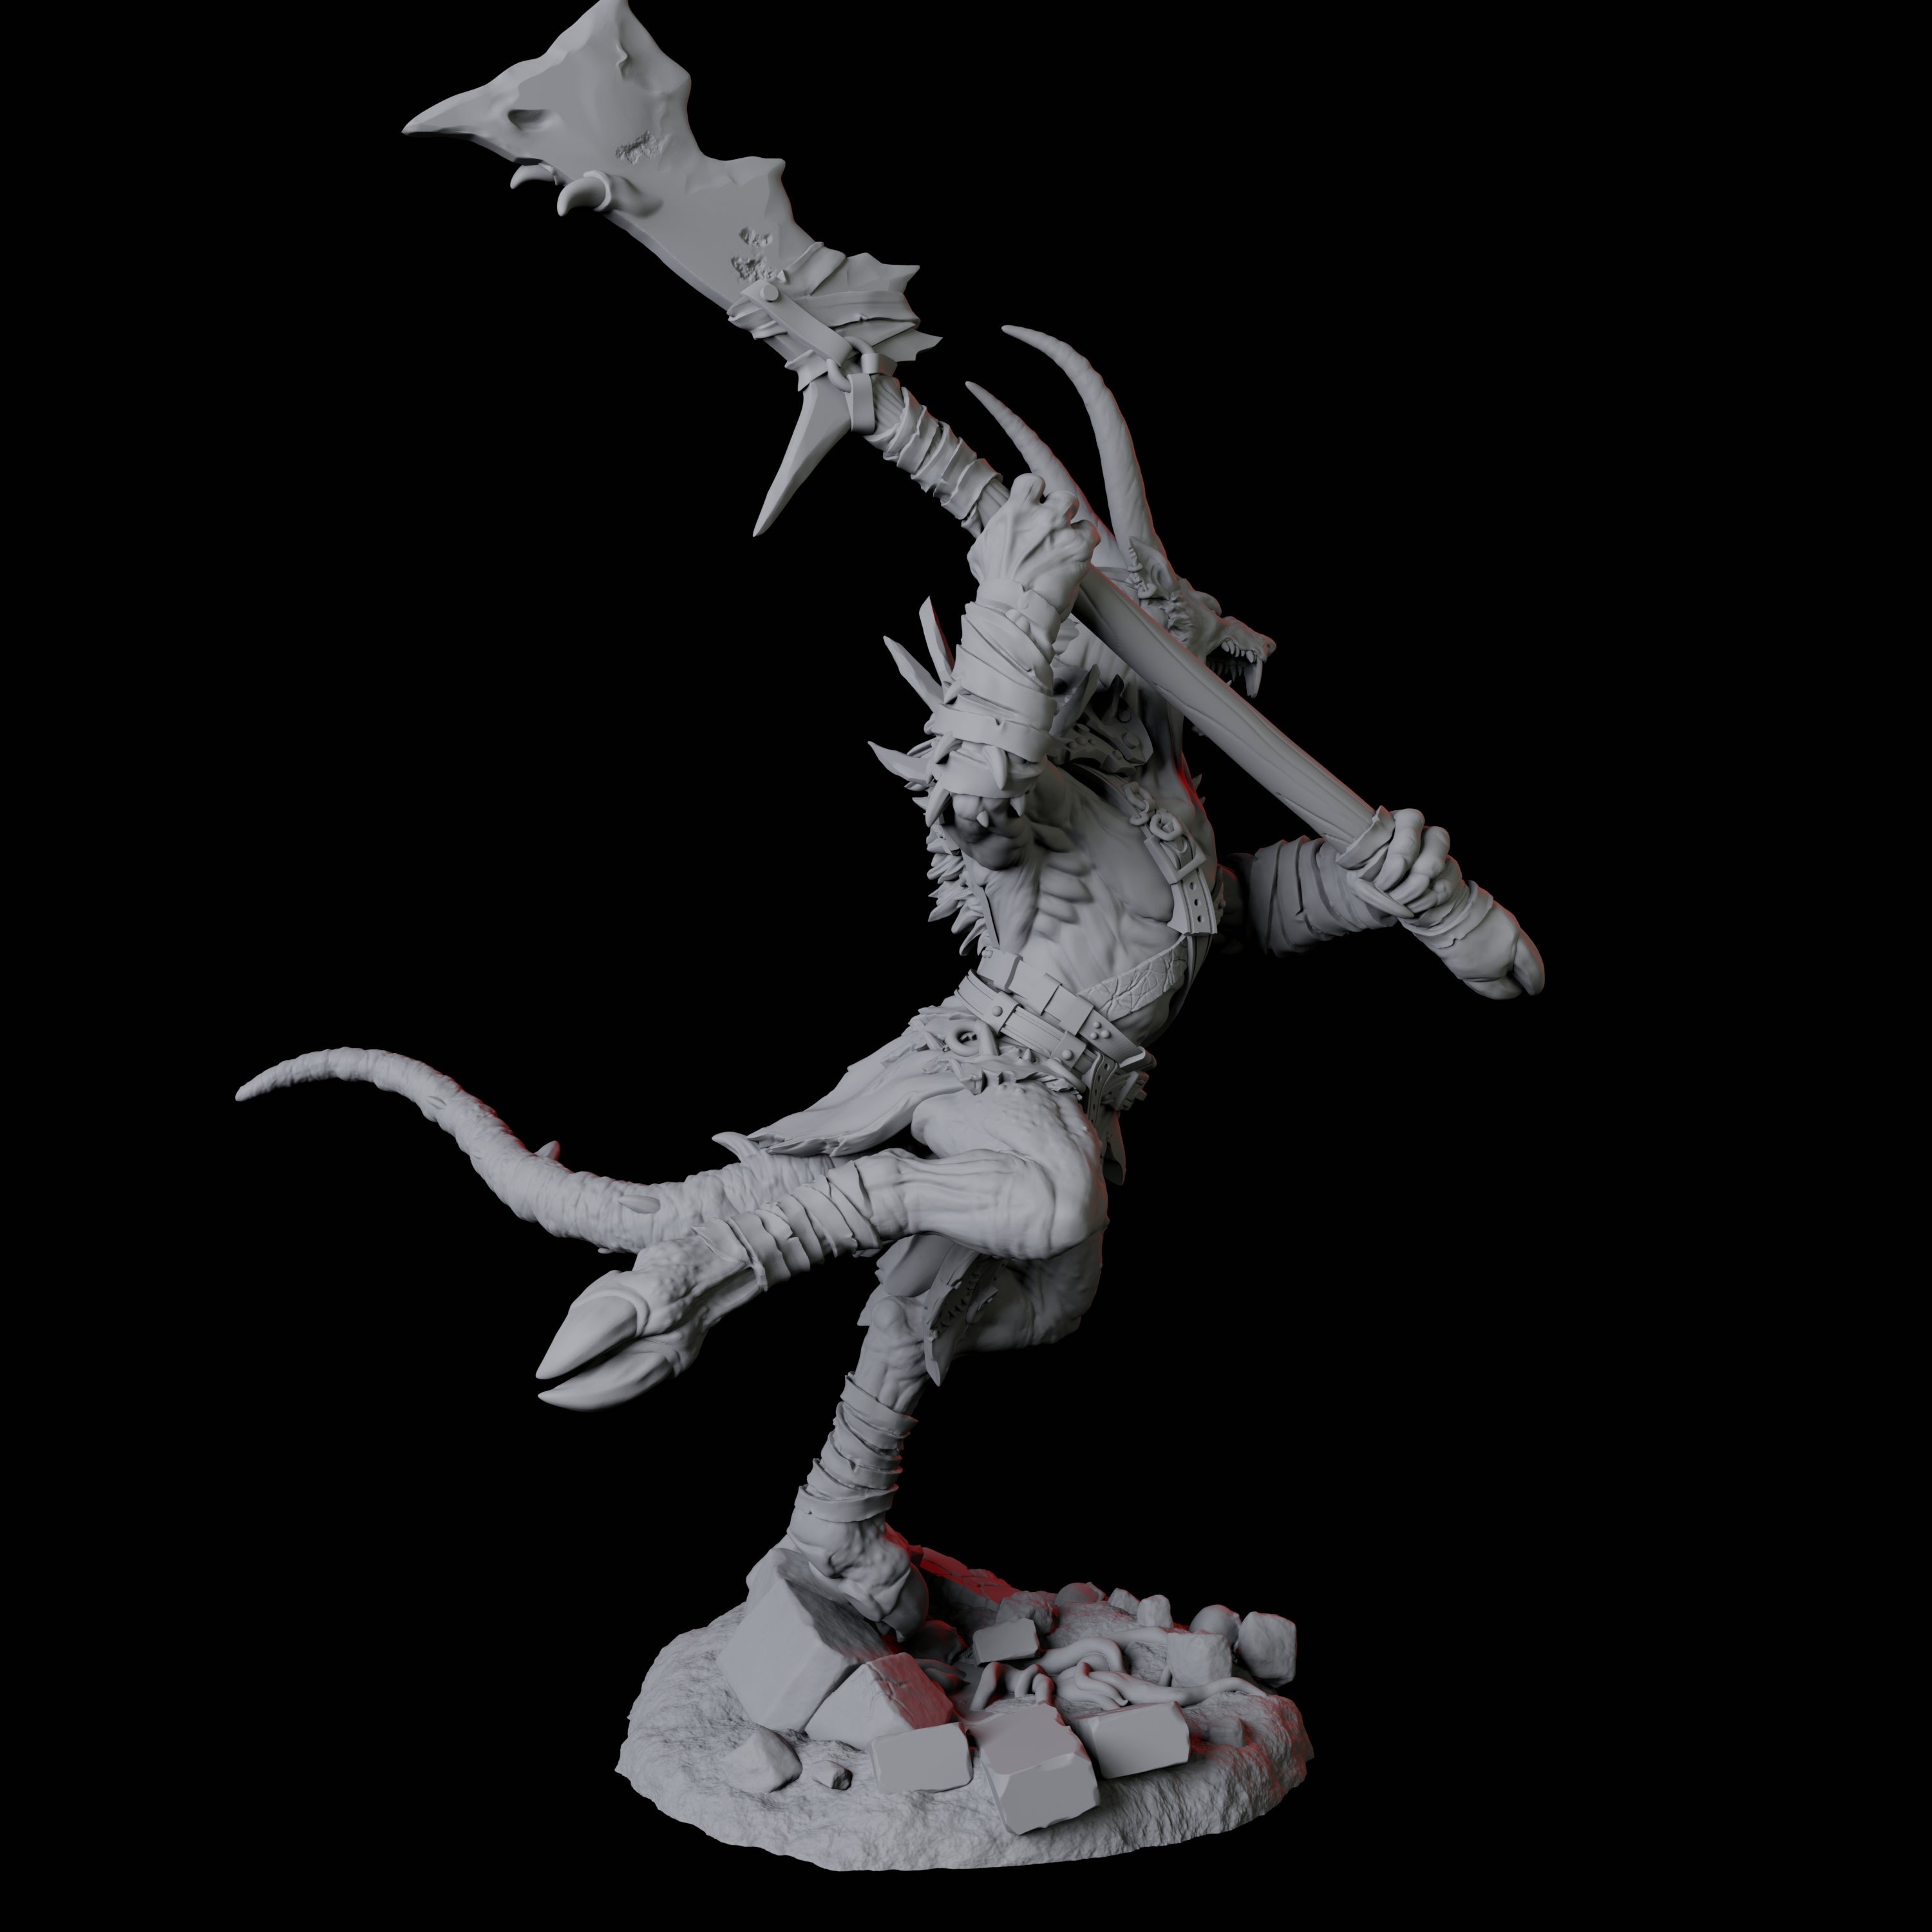 Four Blackfang Mutant Ratfolk Miniature for Dungeons and Dragons, Pathfinder or other TTRPGs